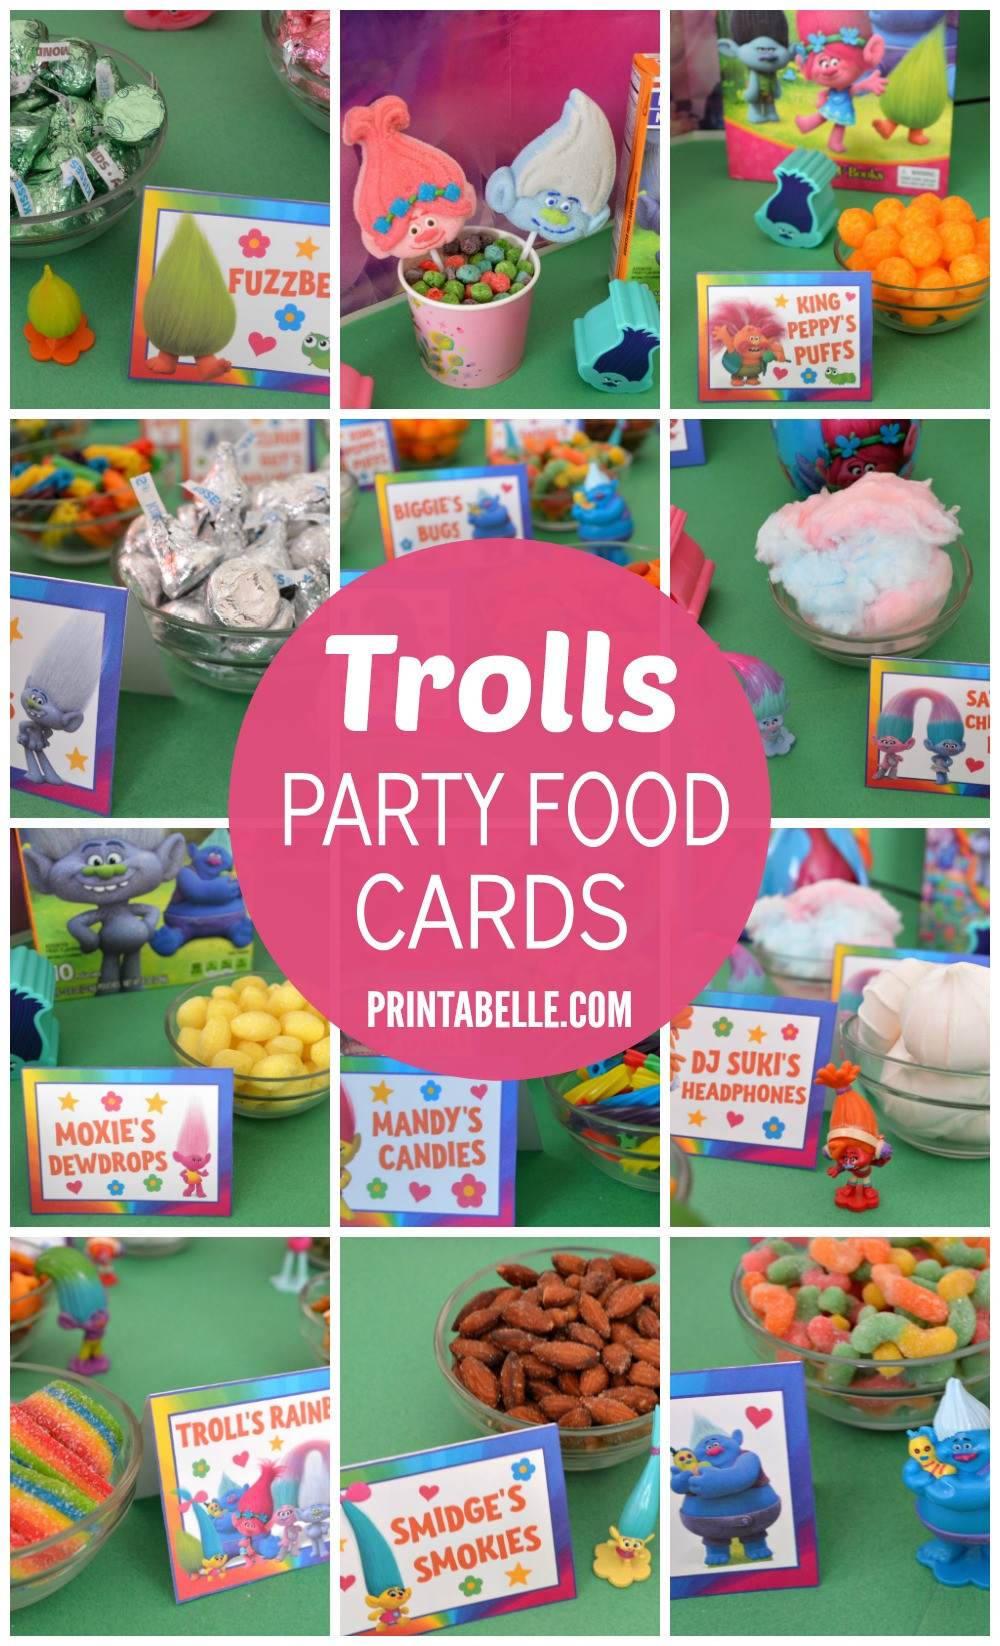 Food Ideas For A Troll Party
 Trolls Party Food Card Set – Free Party Printables at